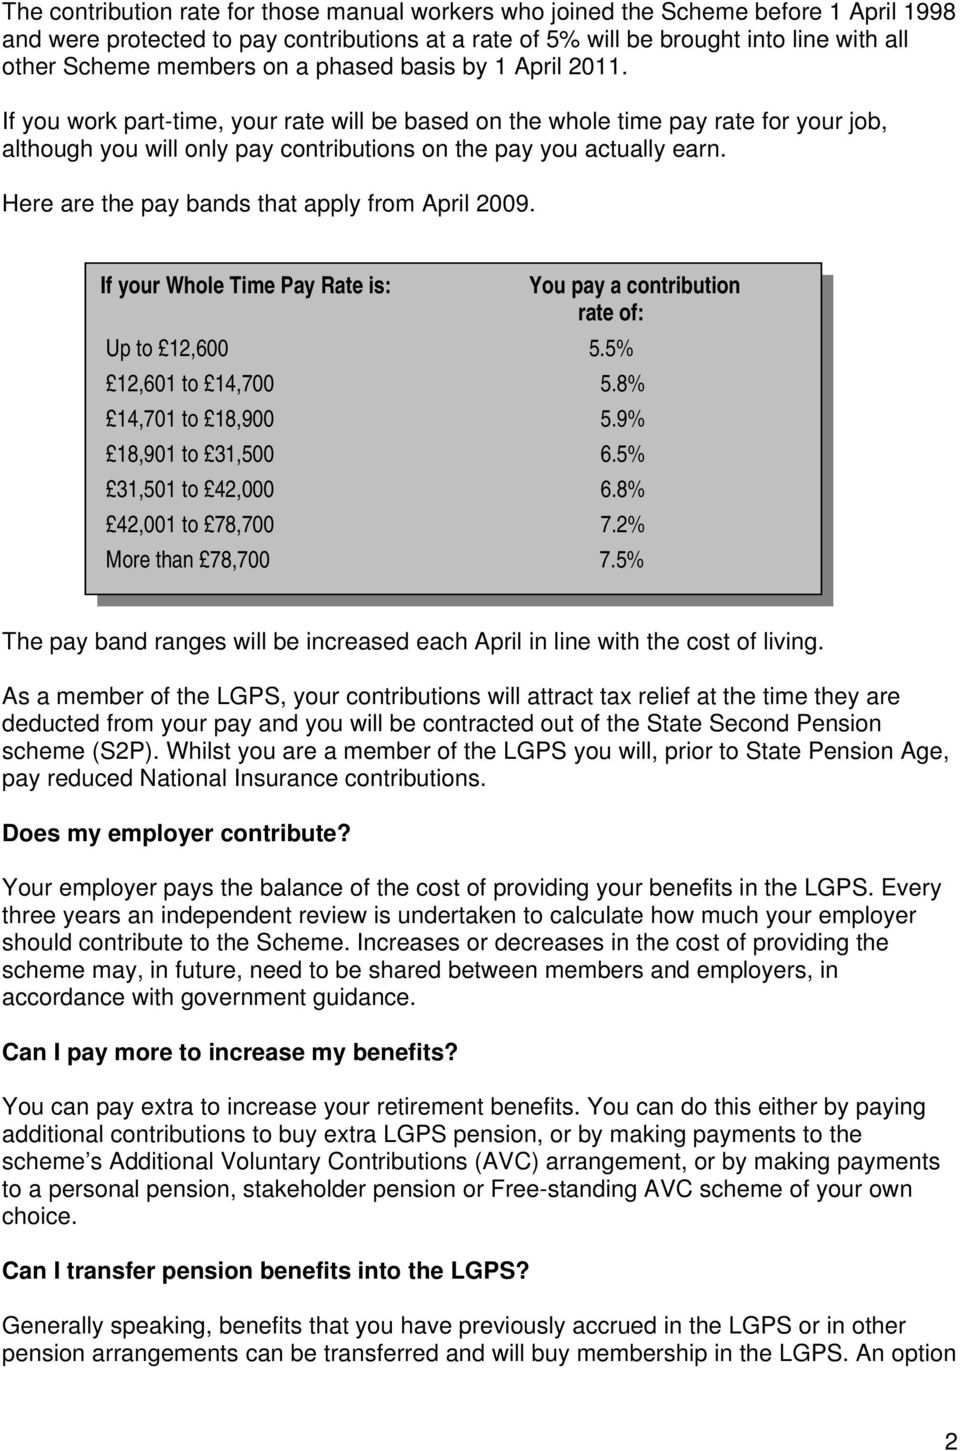 If you work part-time, your rate will be based on the whole time pay rate for your job, although you will only pay contributions on the pay you actually earn.